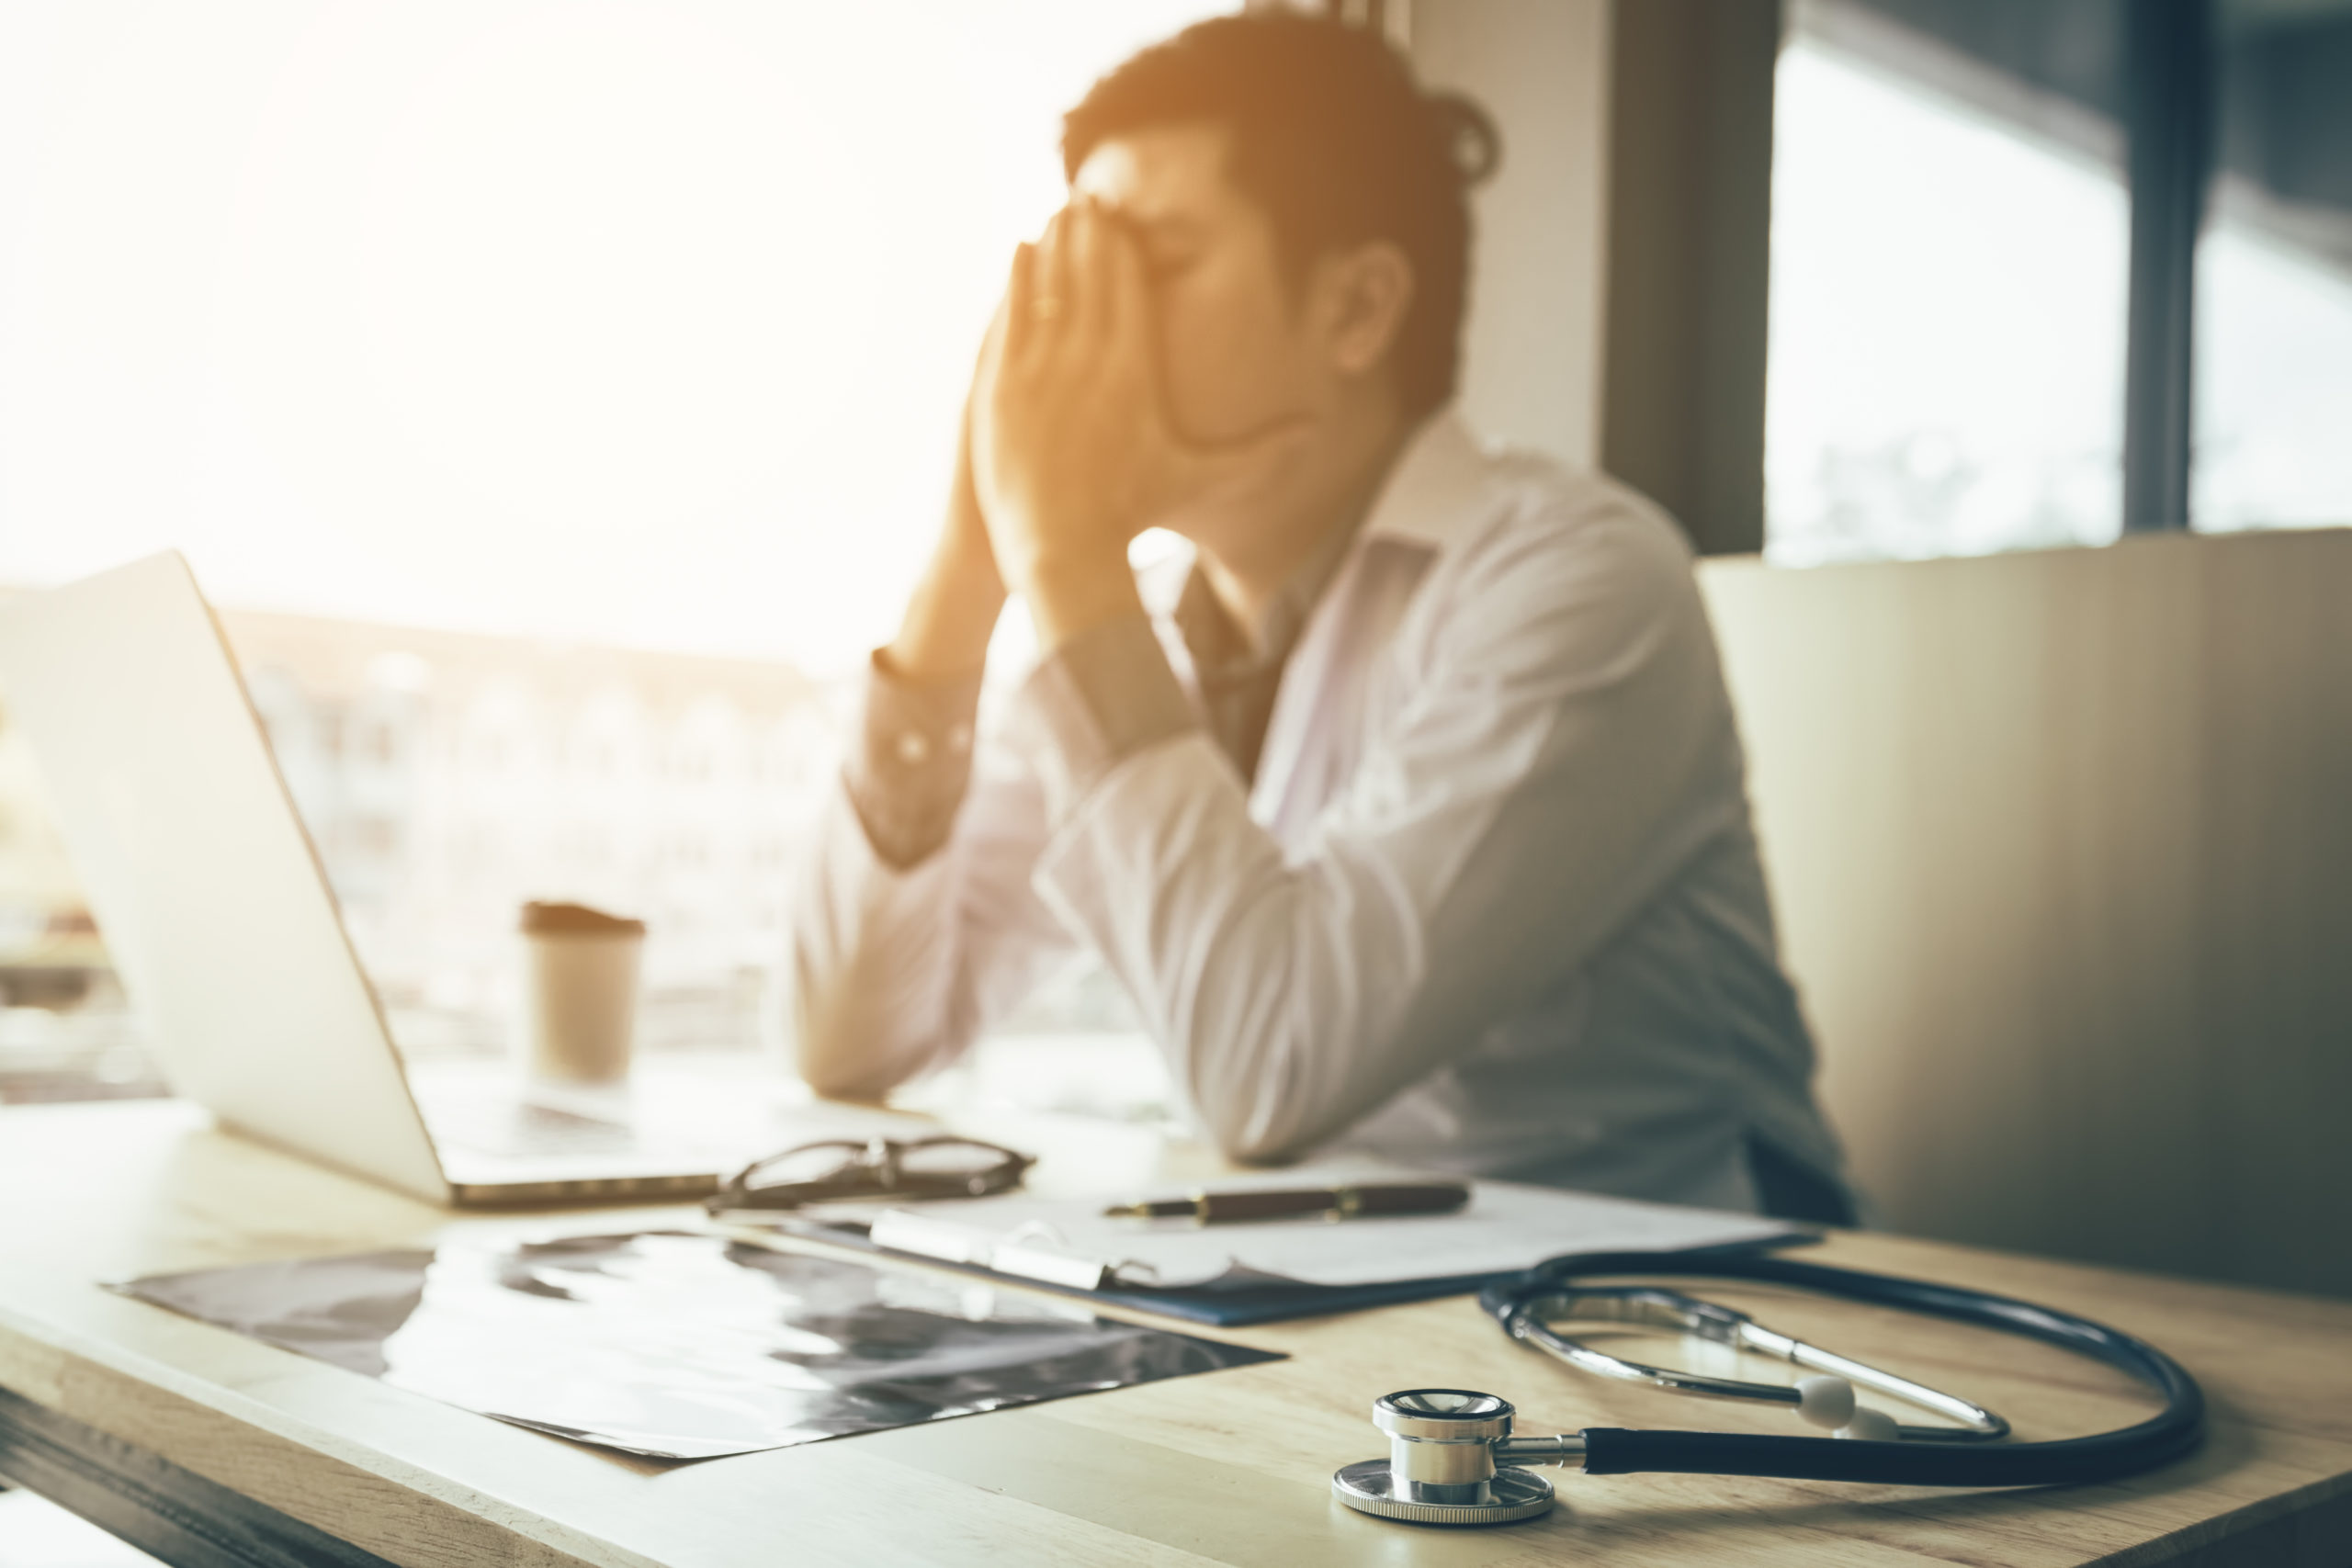 4 Strategies for Reducing Staff Burnout